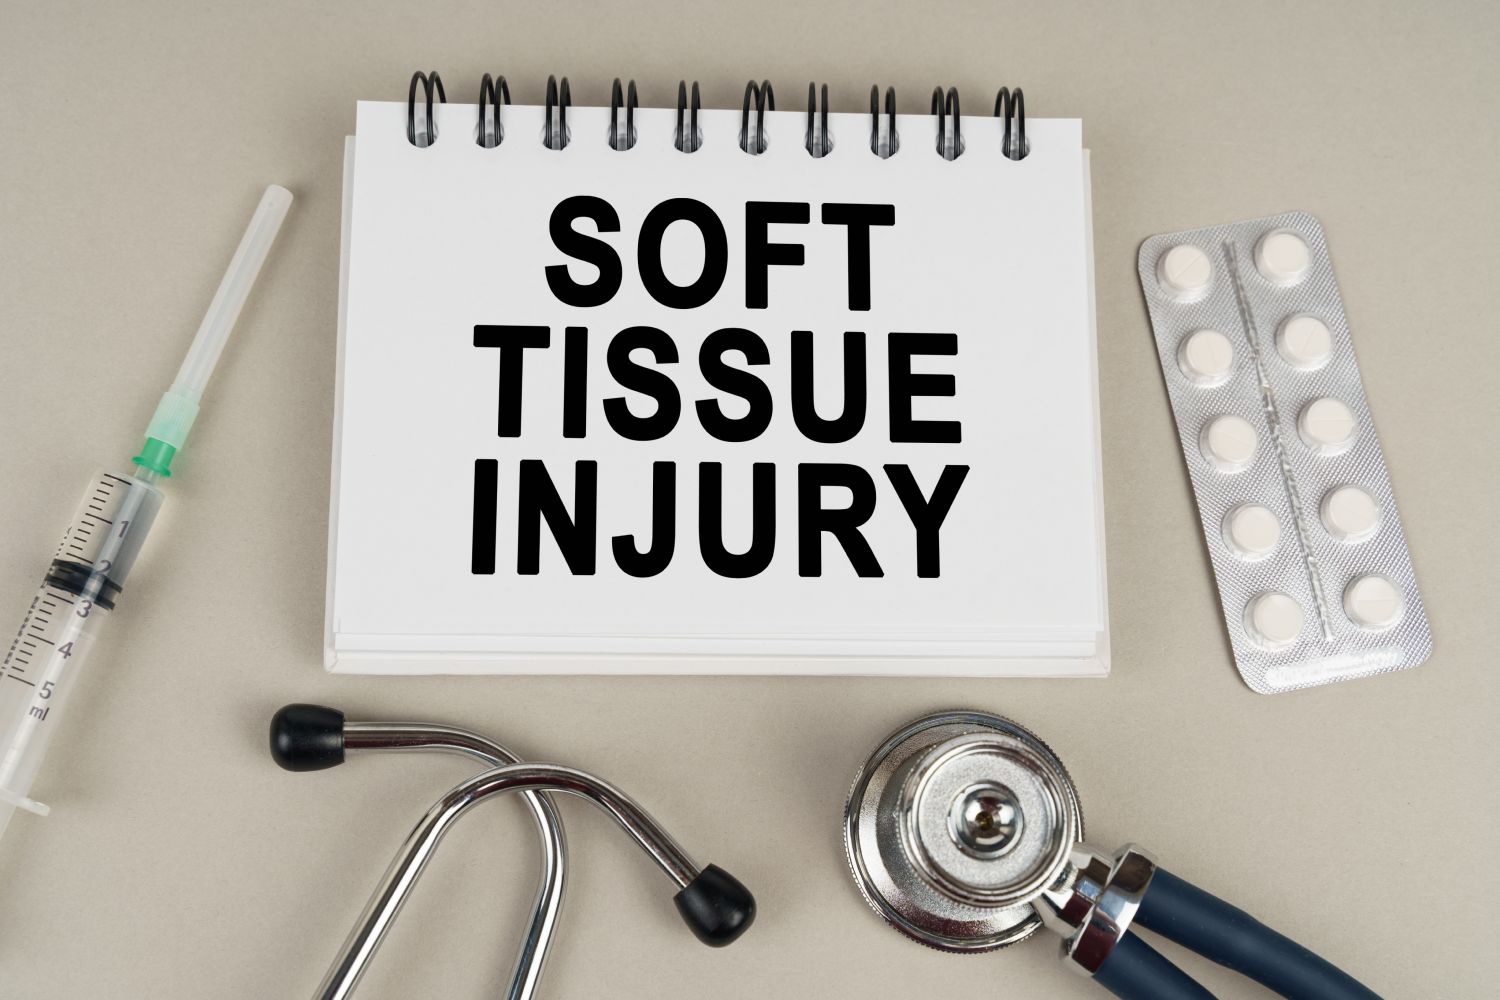 Construction workers are prone to soft tissue injuries that can have serious consequences. Here’s what a soft tissue injury is and how we can help.